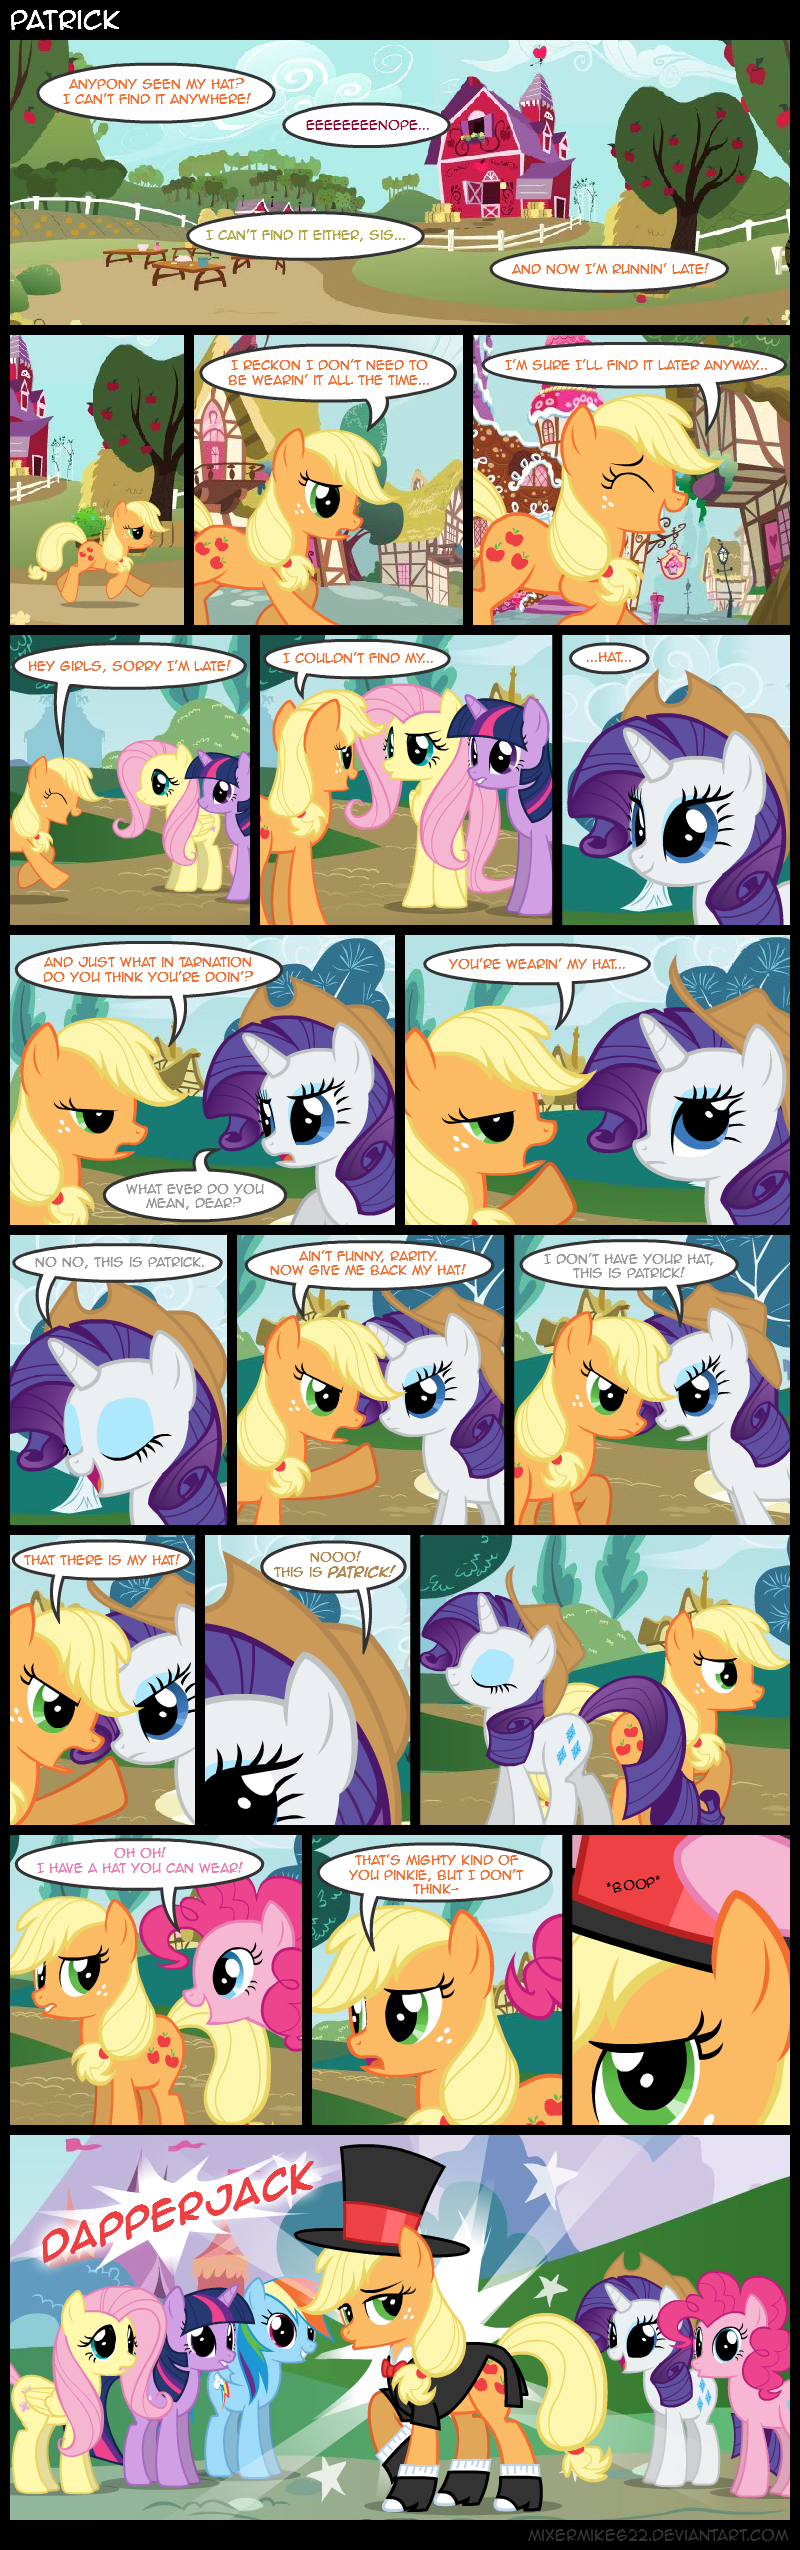 2011 applejack_(mlp) blonde_hair blue_eyes building clothed clothing comic cowboy_hat cutie_mark dapper dialog english_text equine female feral fluttershy_(mlp) freckles friendship_is_magic fur green_eyes group hair hat horn horse mammal mixermike622 multi-colored_hair my_little_pony outside pegasus pink_eyes pink_fur pink_hair pinkie_pie_(mlp) pony purple_hair rainbow_dash_(mlp) rainbow_hair rarity_(mlp) text top_hat tuxedo twilight_sparkle_(mlp) unicorn white_fur wings yellow_fur